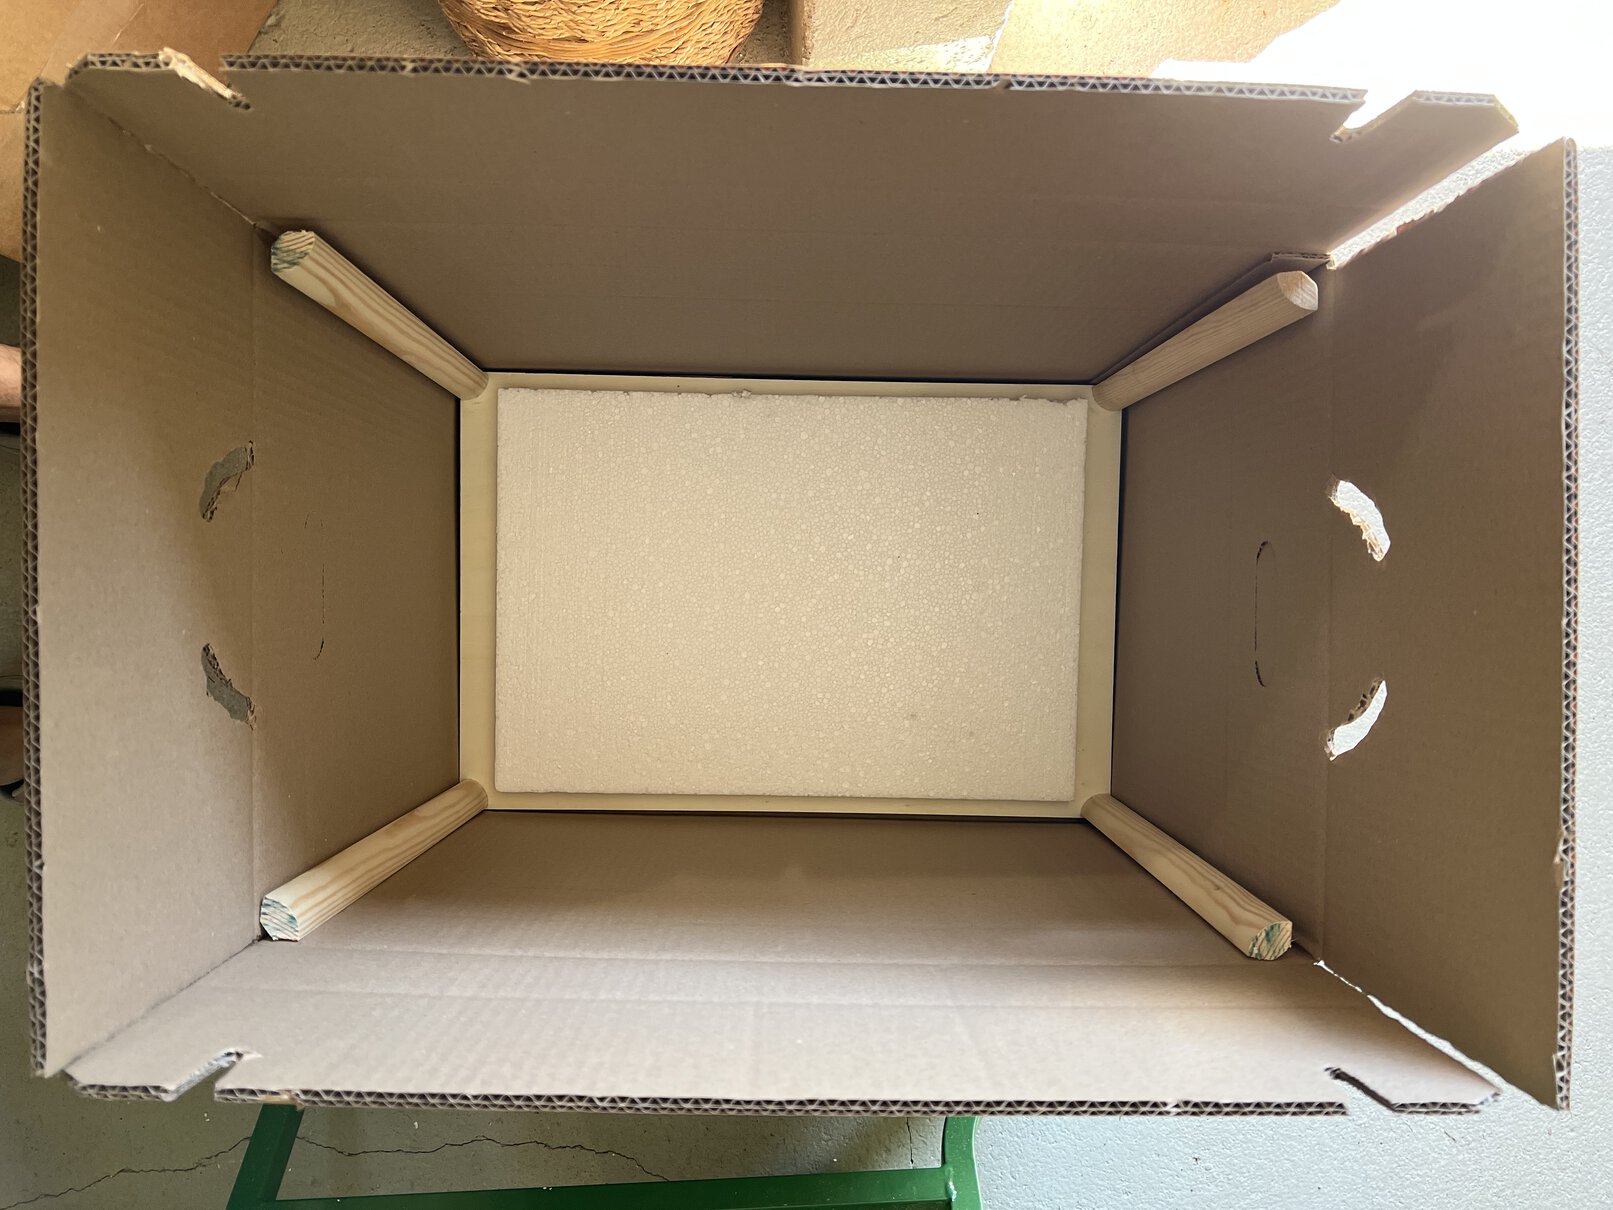 The frame in the outer box